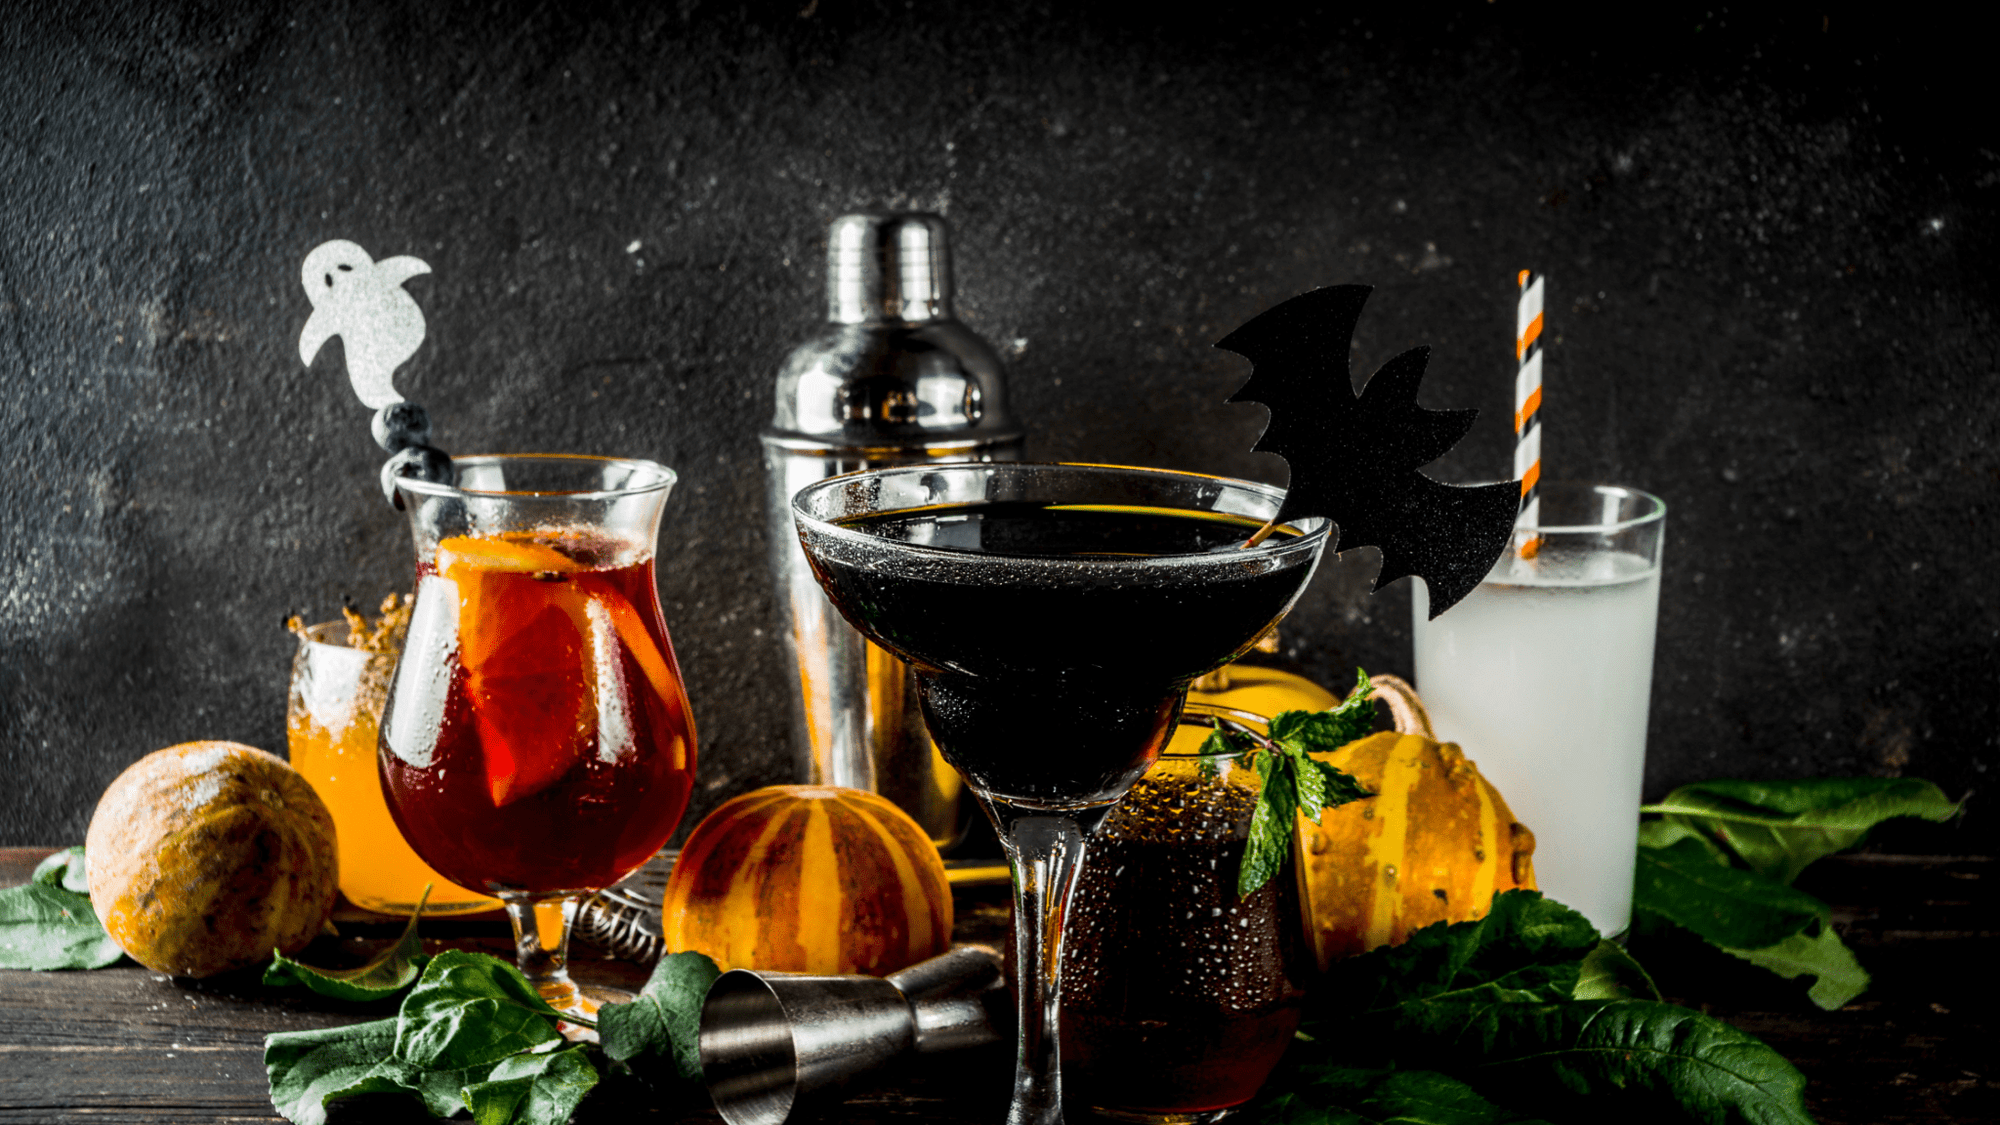 Drink & Candy Halloween Pairings As Told By John deBary - Boisson